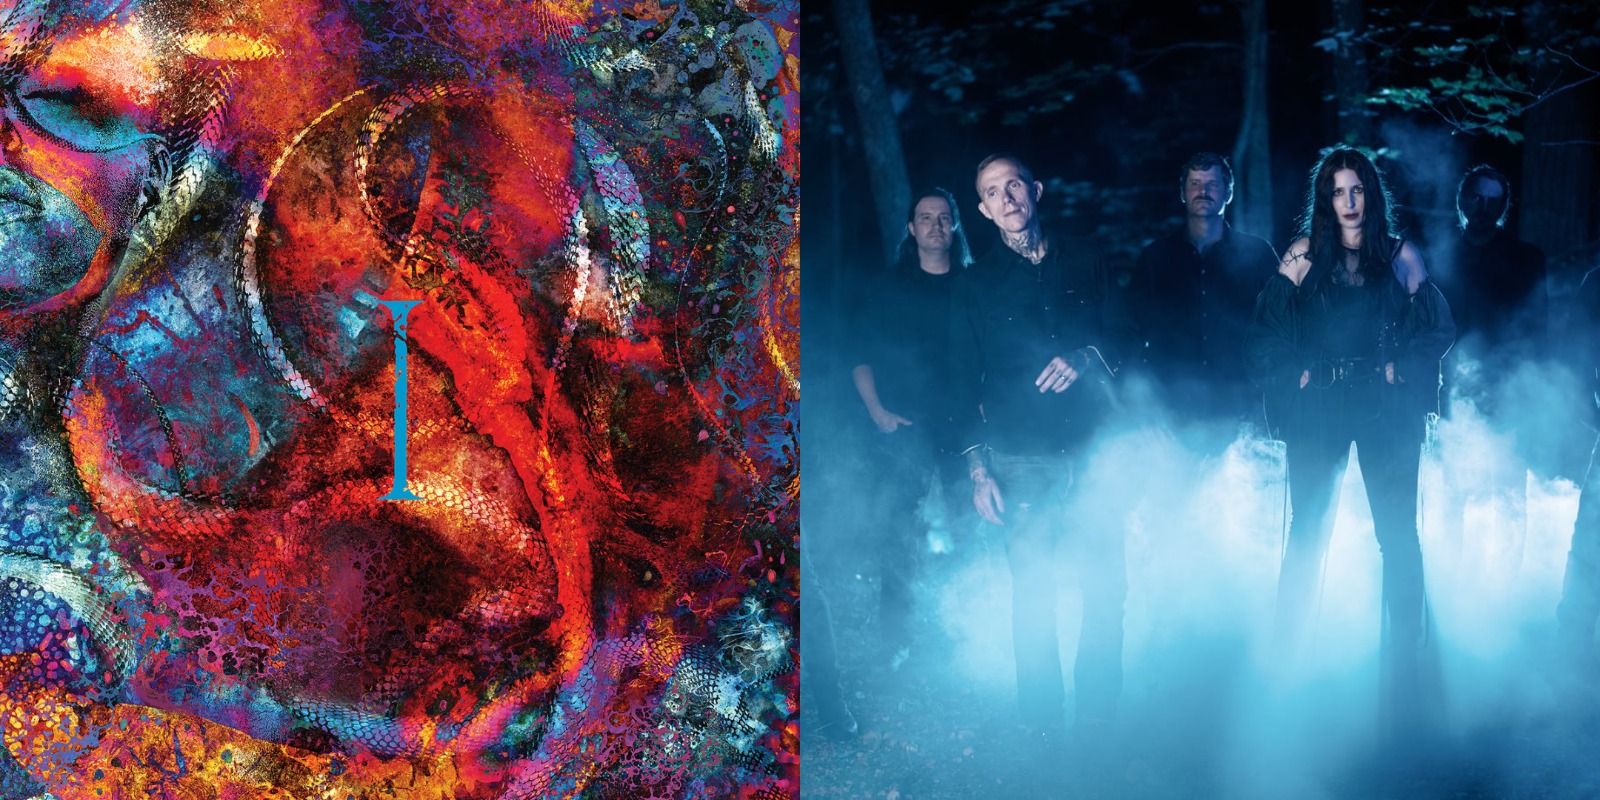 Split image of the album cover of Bloodmoon: I and Converge and Chelsea Wolfe